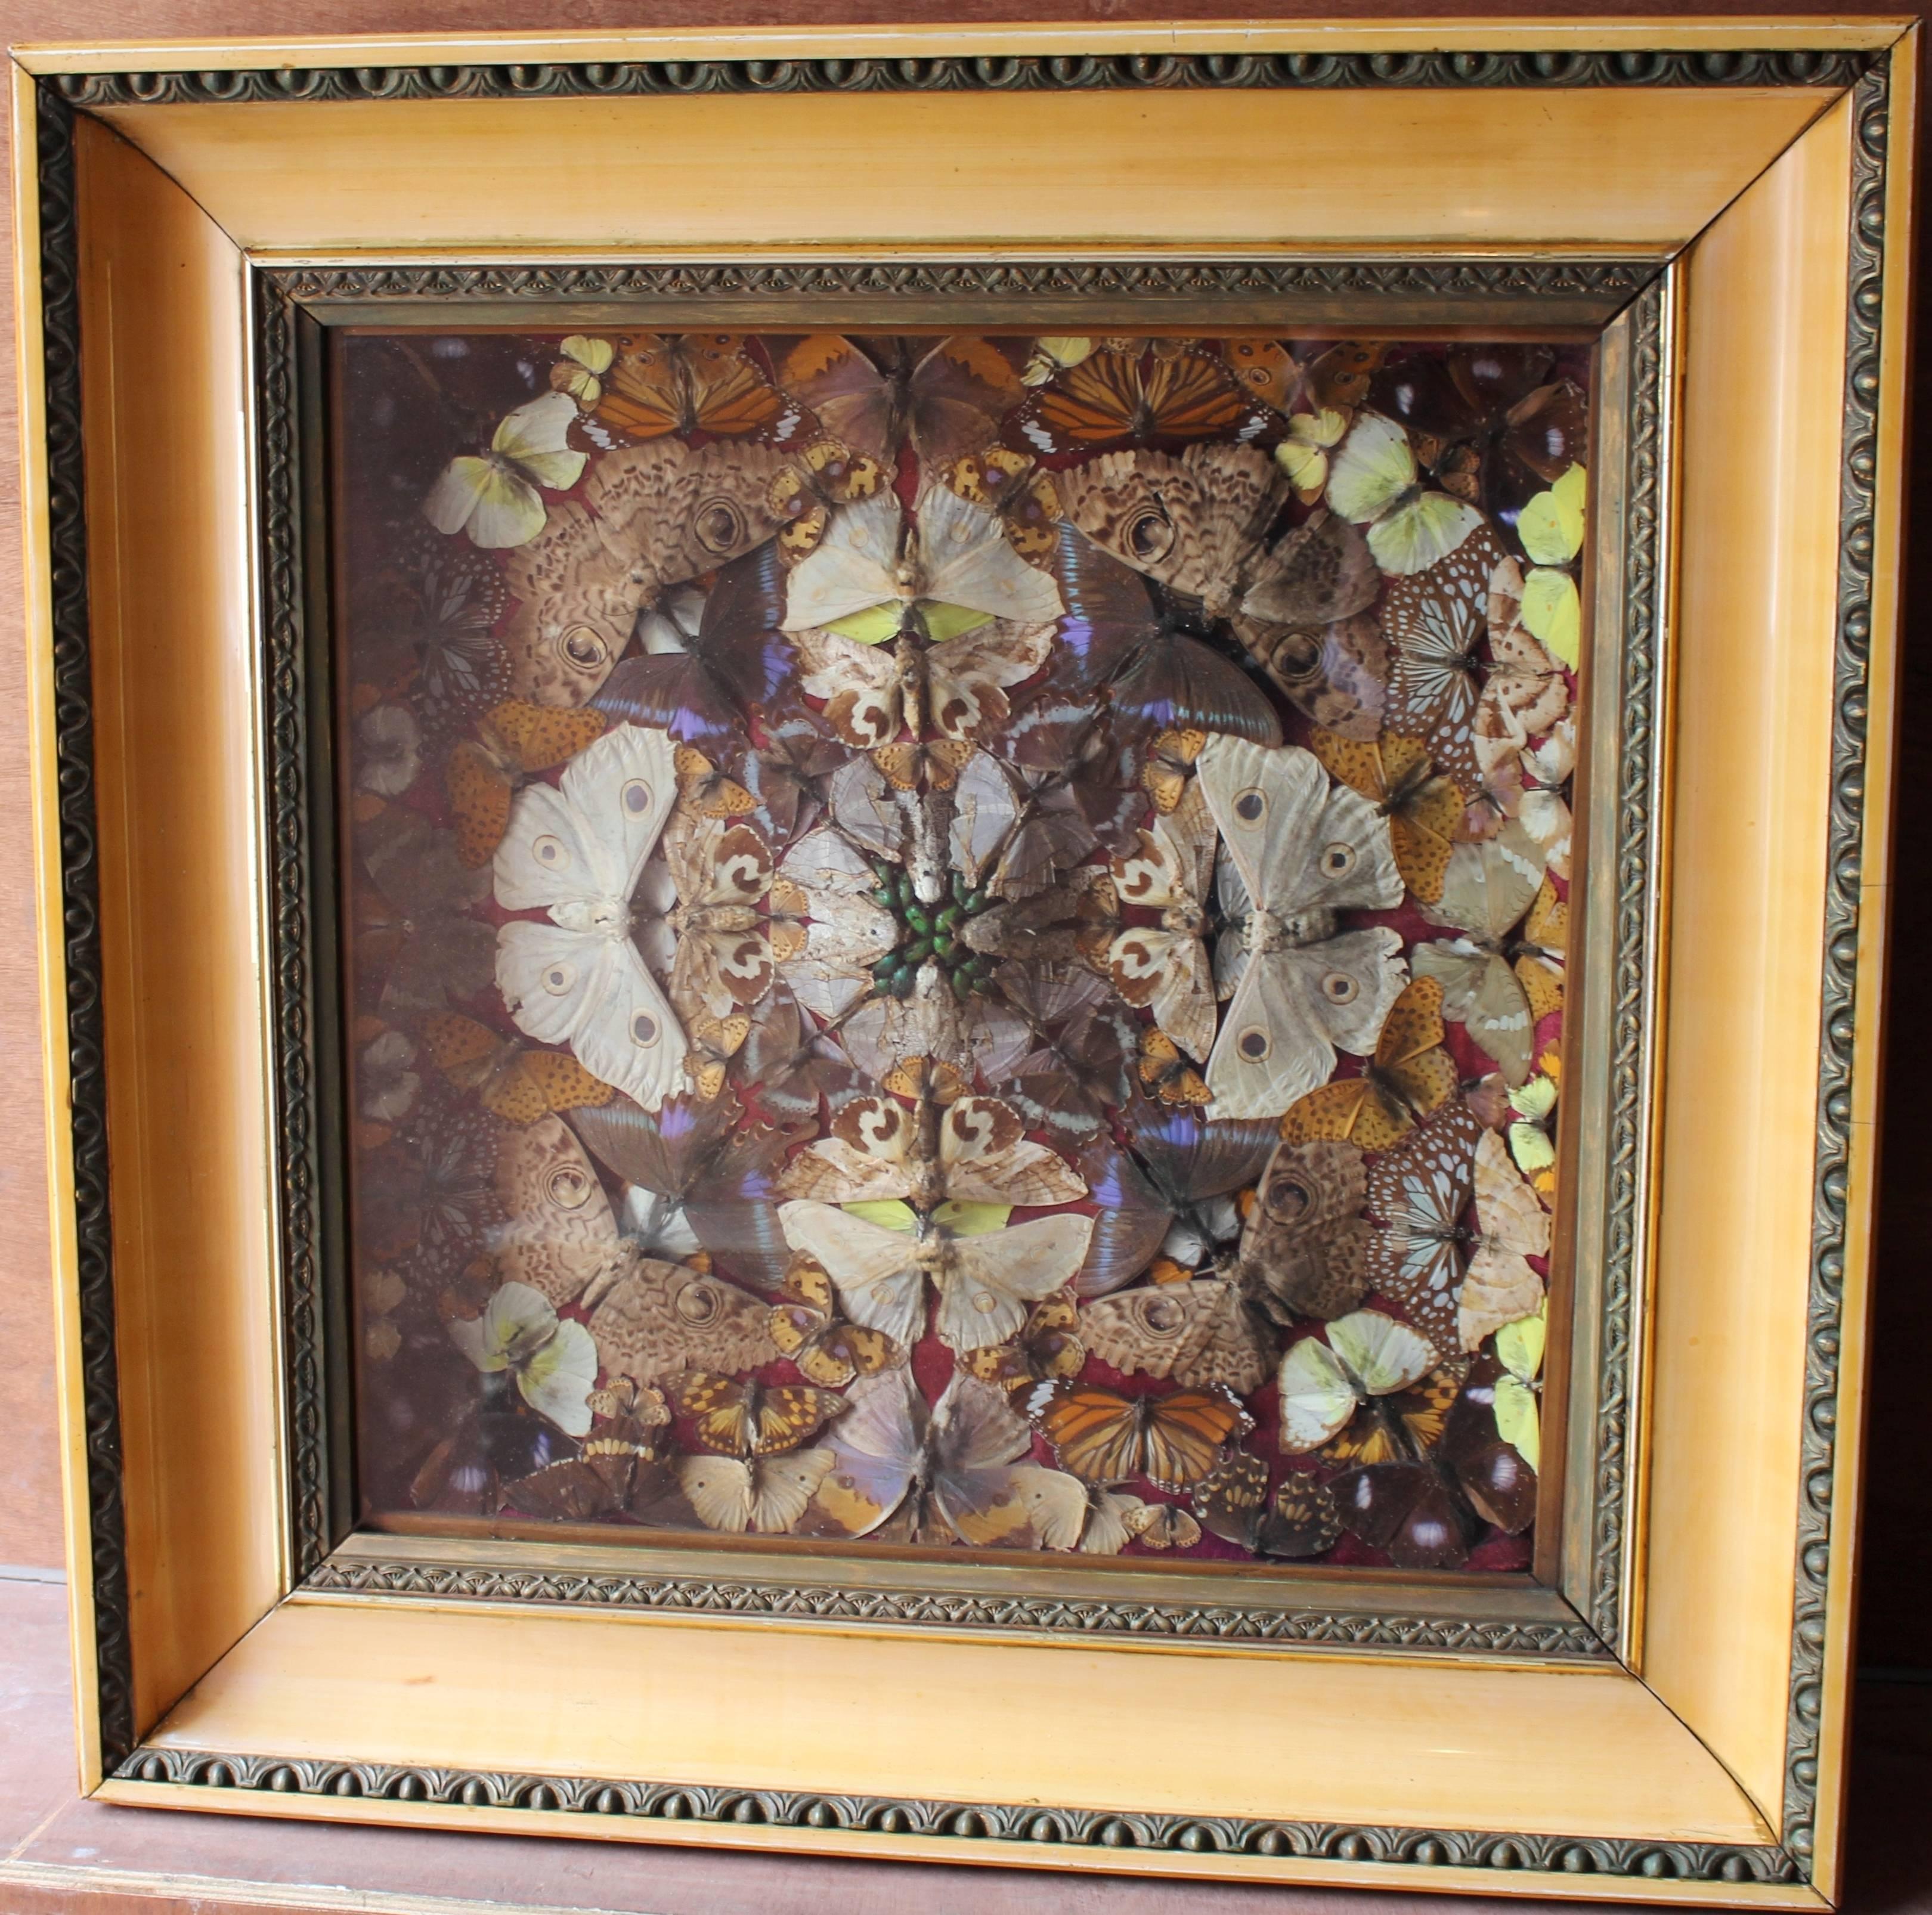 

Period Victorian.
Medium Taxidermy.
Frame 59 x 59 cm / 23 1/4 x 23 1/4 in.
Frame set in heavy commensurate frame.
Condition very good condition commensurate with age.

Here we are pleased to offer a pair of Victorian buttefly taxidermy